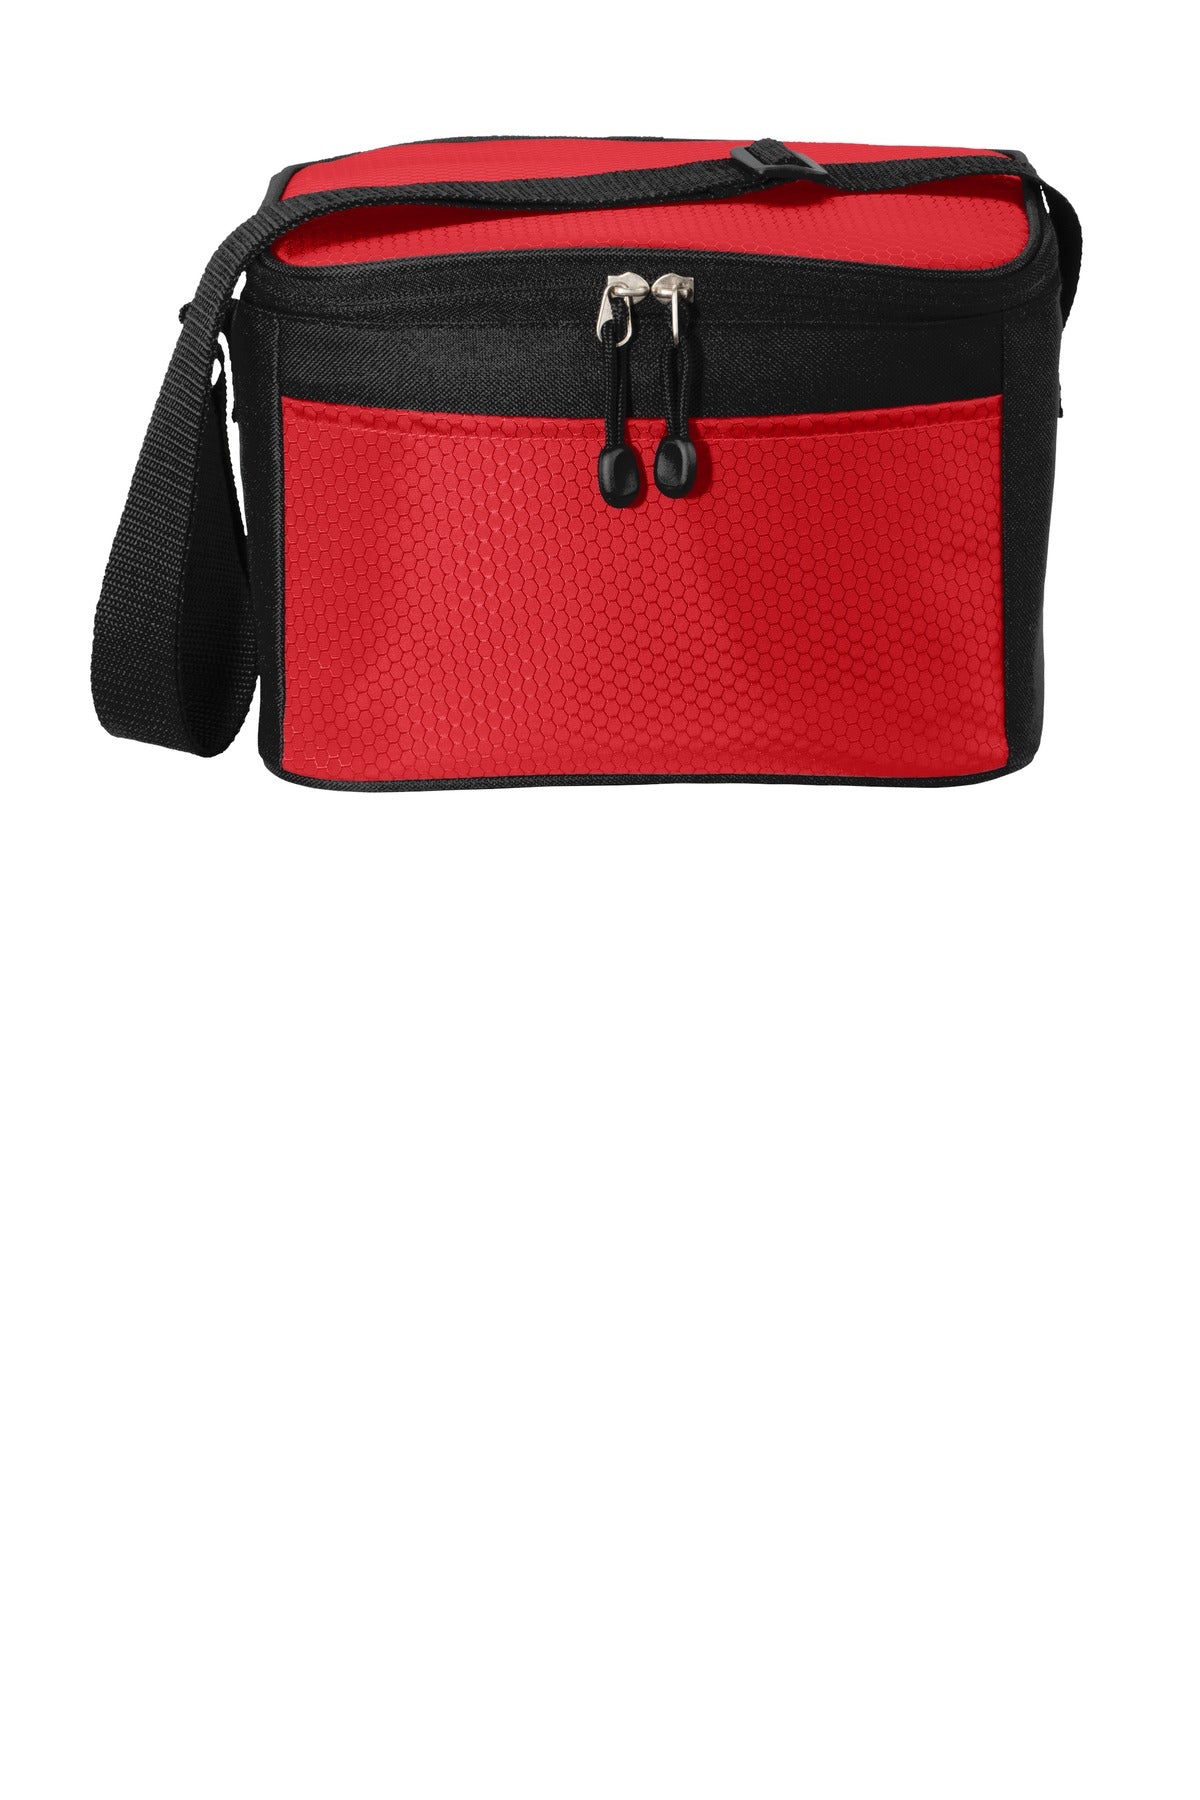 Bags Red/ Black OSFA Port Authority